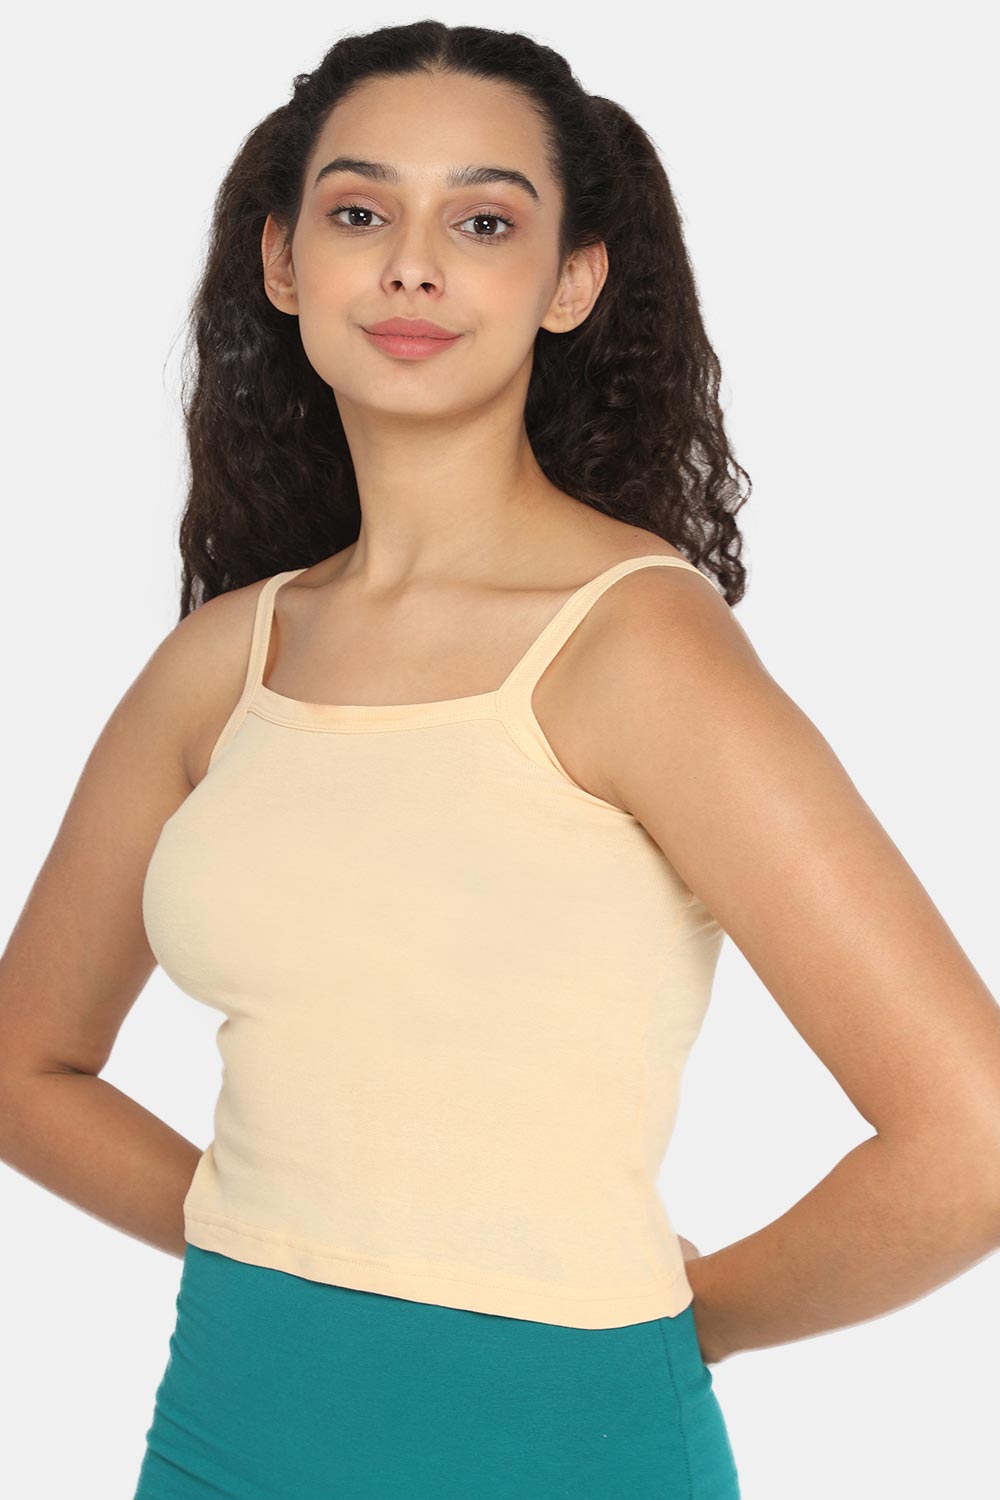 Intimacy Camisole-Slip Special Combo Pack - In01 - Pack of 2 - C01